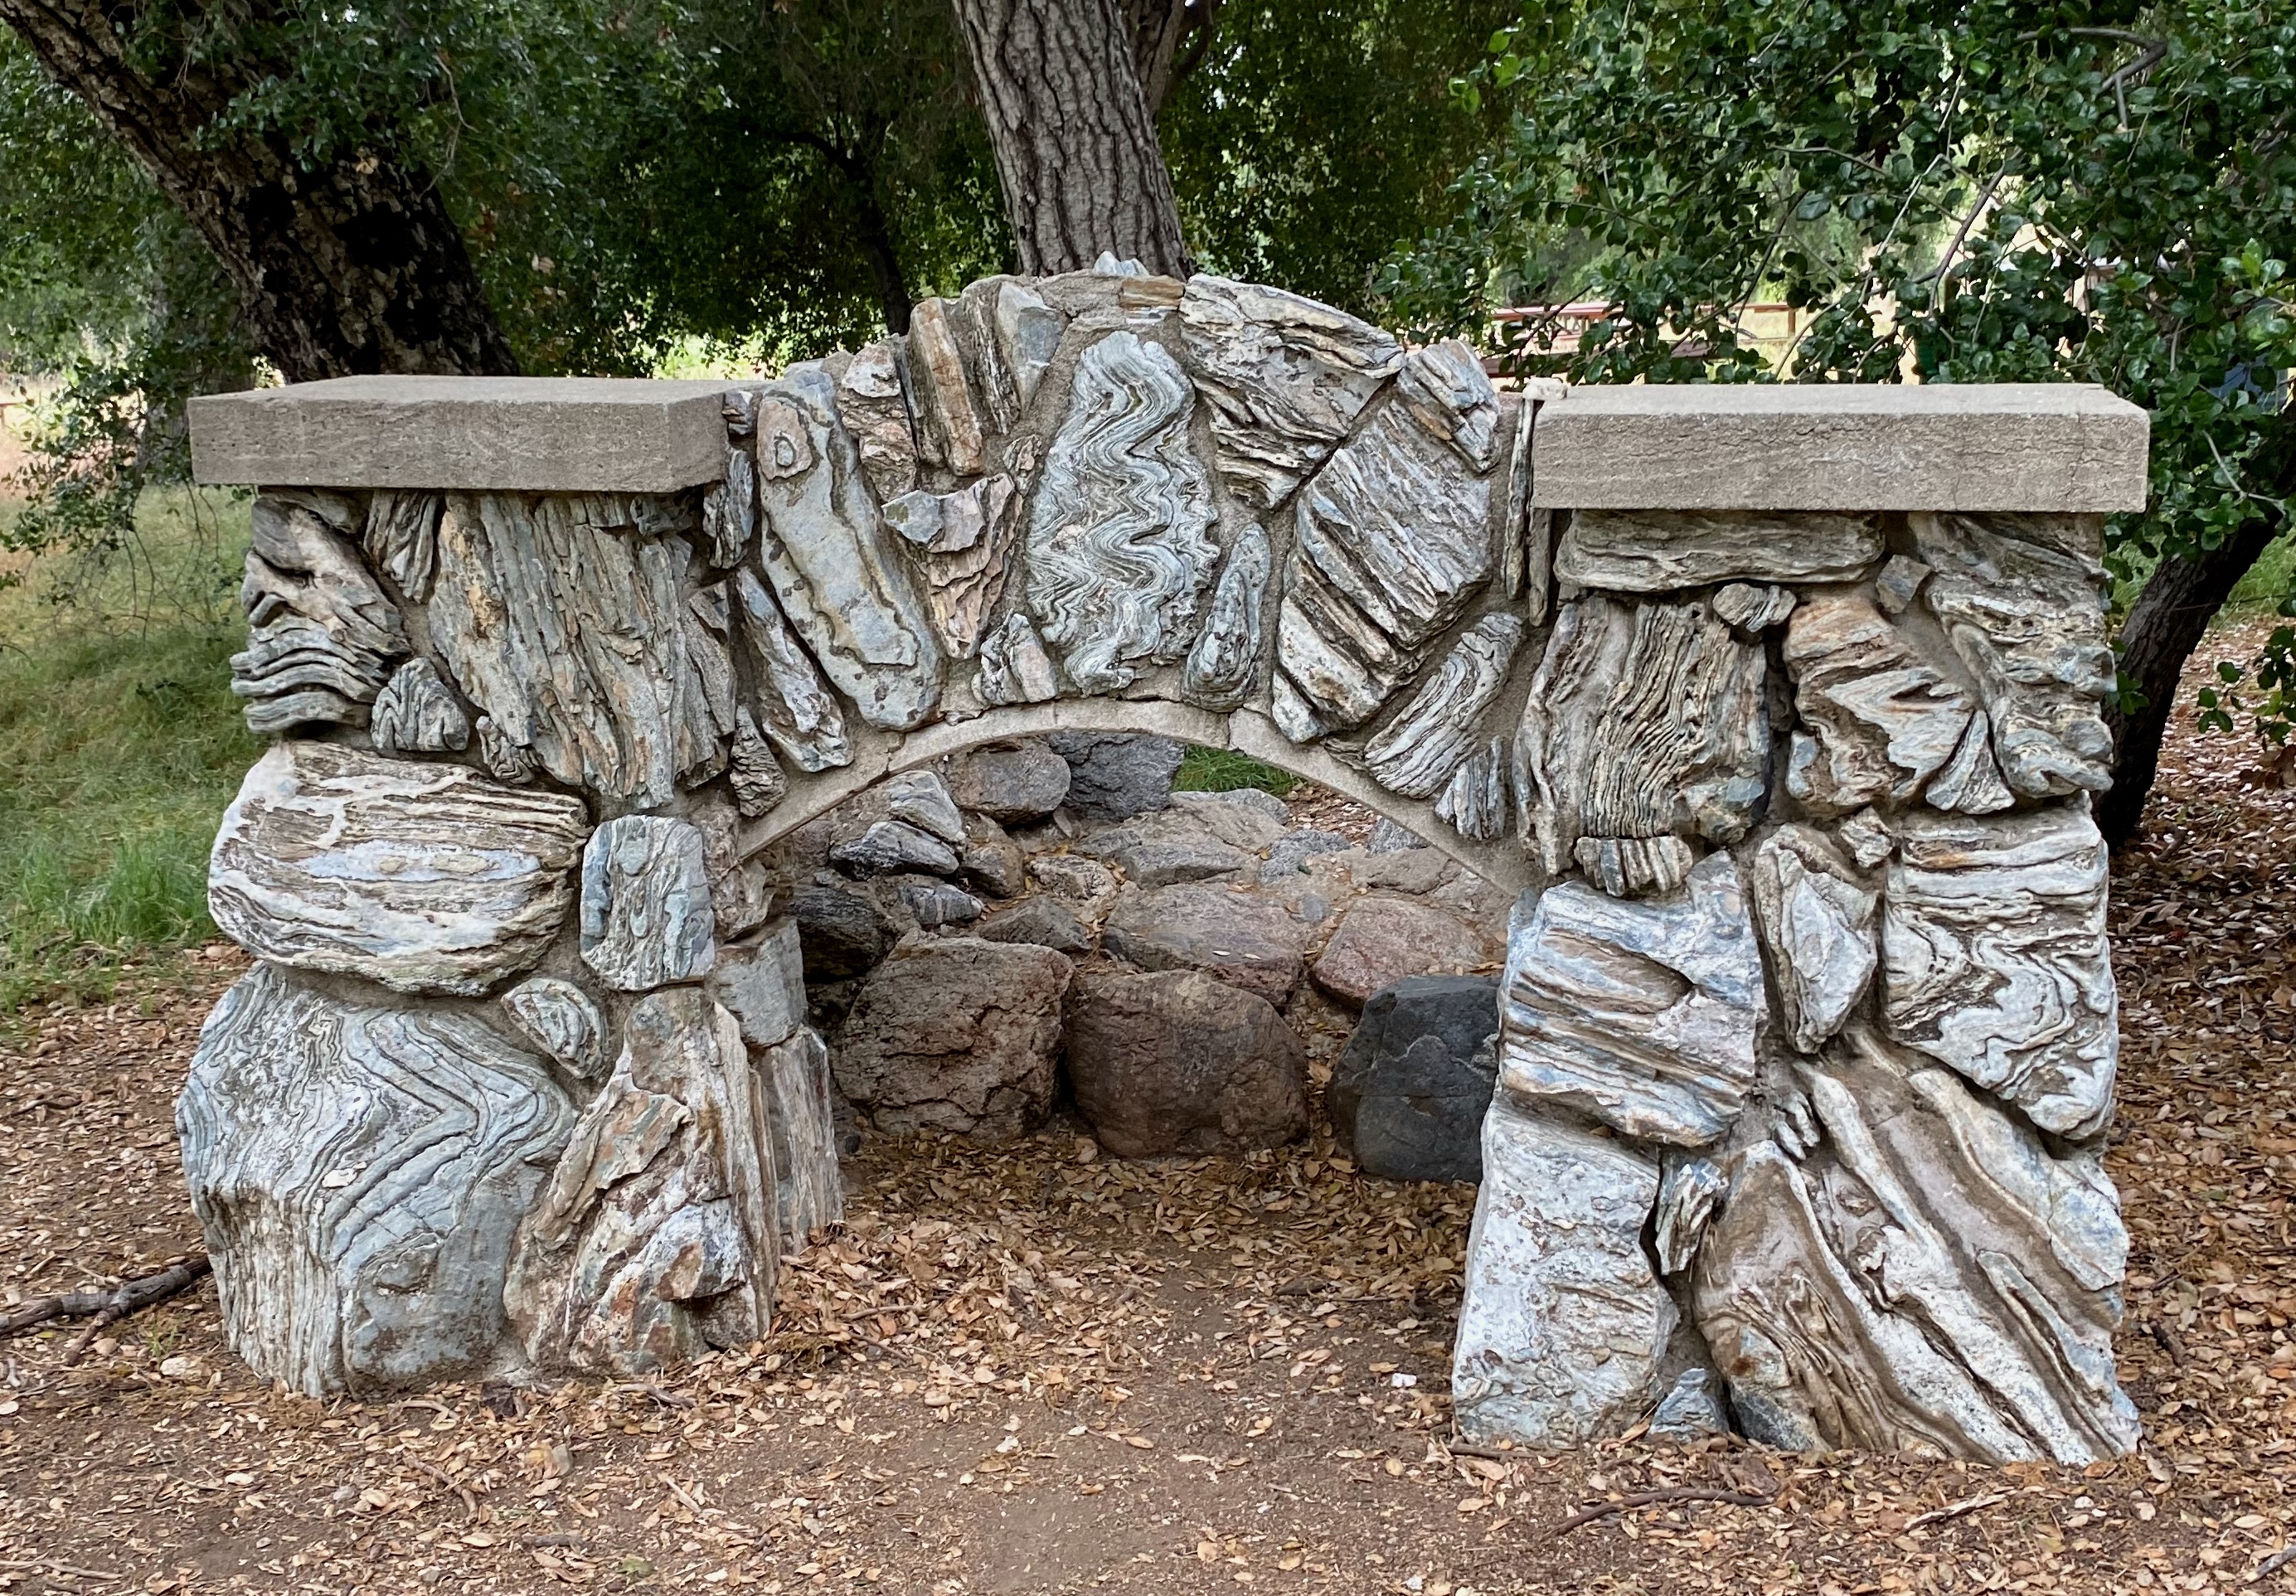 An old rock fireplace at the end of the Placerita Canyon trail in Newhall, CA.